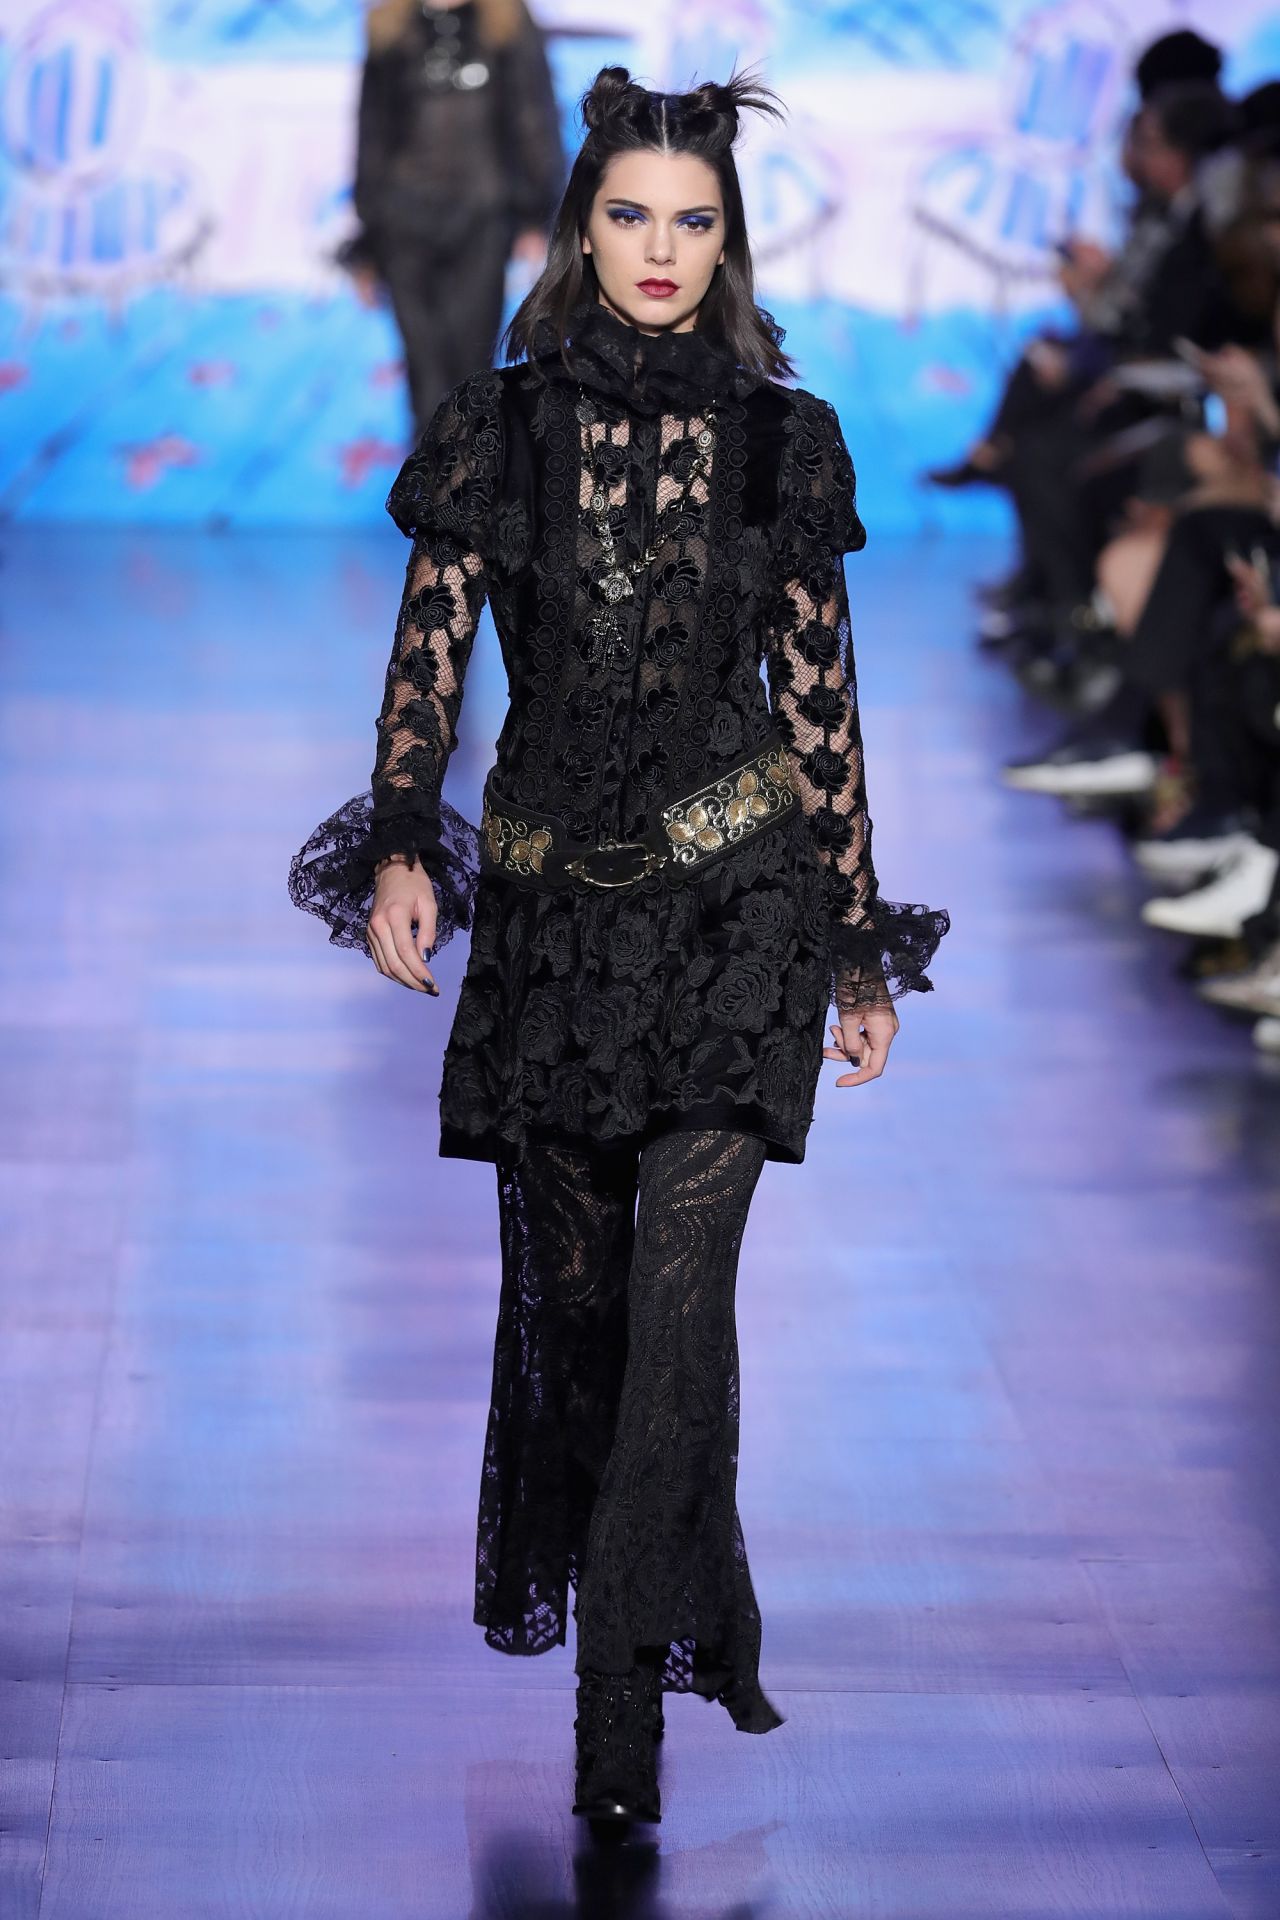 Kendall Jenner Supermodel Runway Walk - Anna Sui Fashion Show in NYC 2 ...